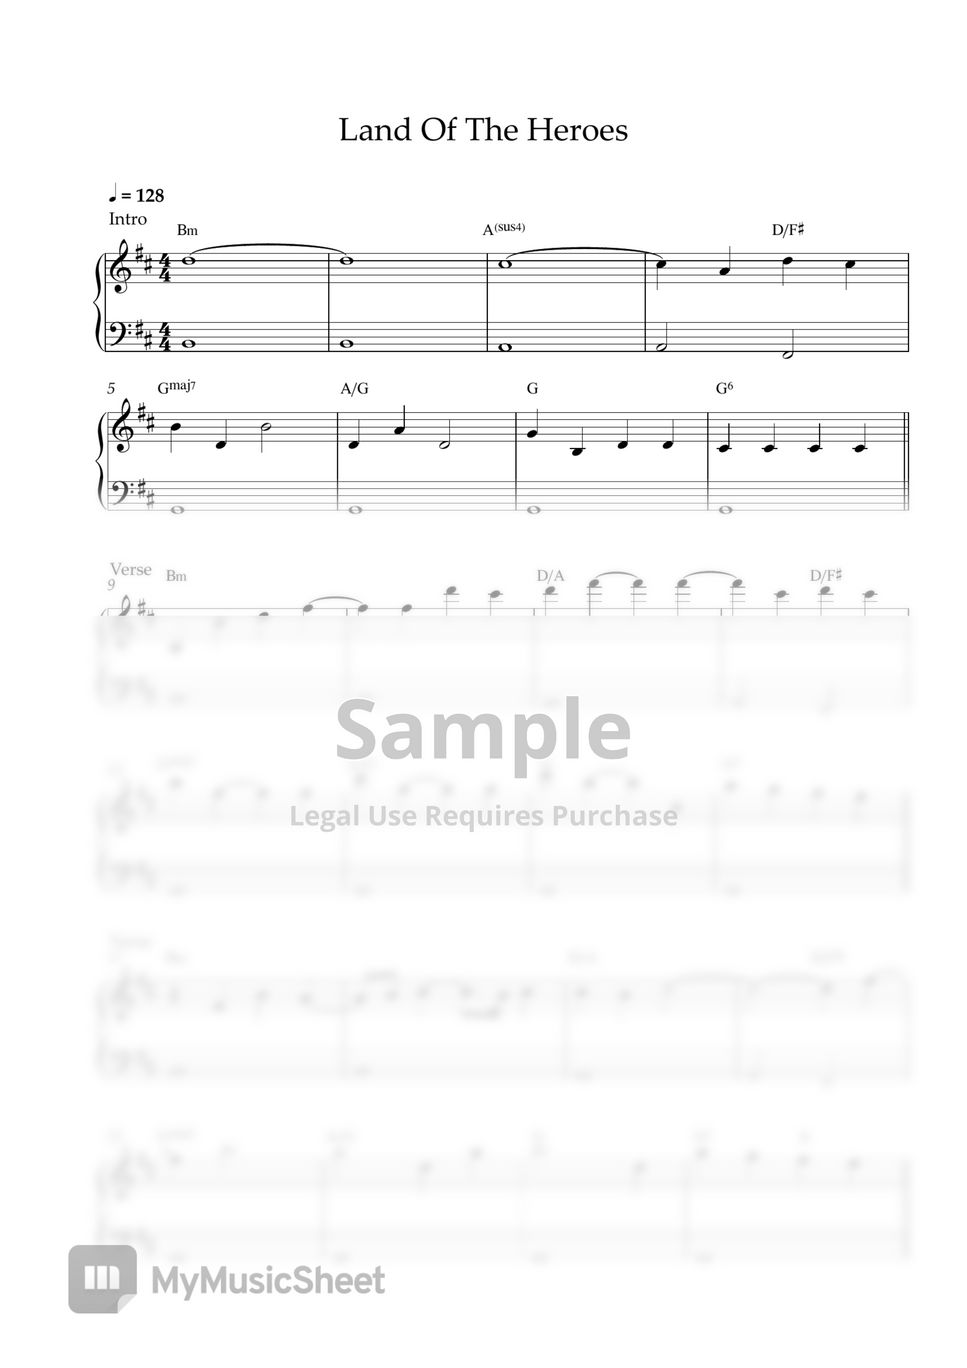 Alan Walker & Sophie Stray - Land Of The Heroes (EASY PIANO SHEET) by Pianella Piano